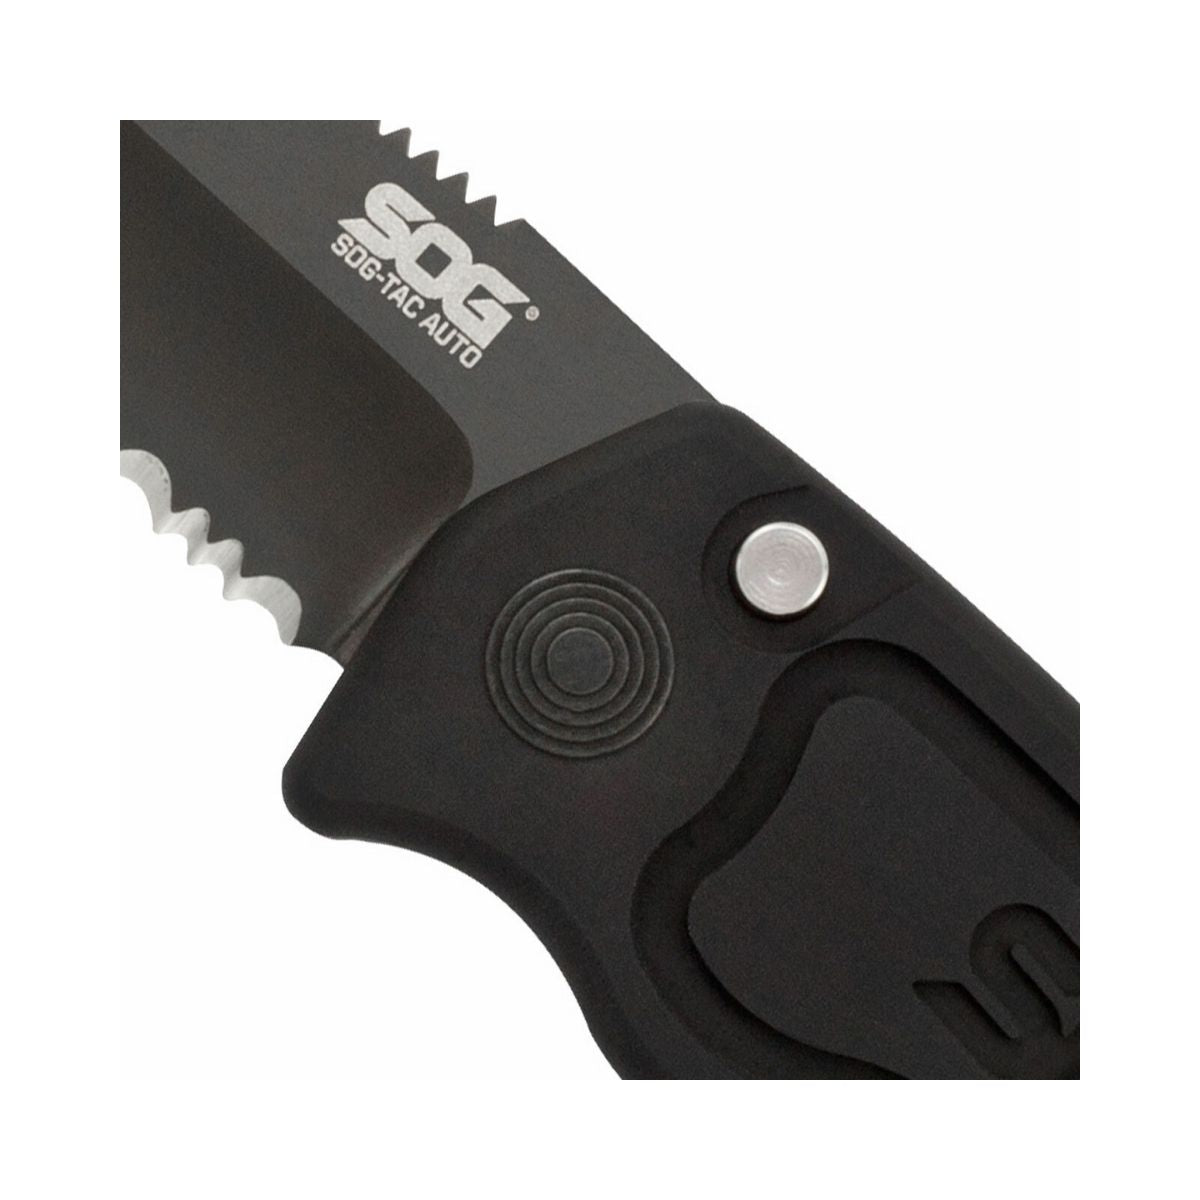 SOG TAC Auto - Tanto - Serrated Knife - ST-04 - Outdoor Travel Gear 4